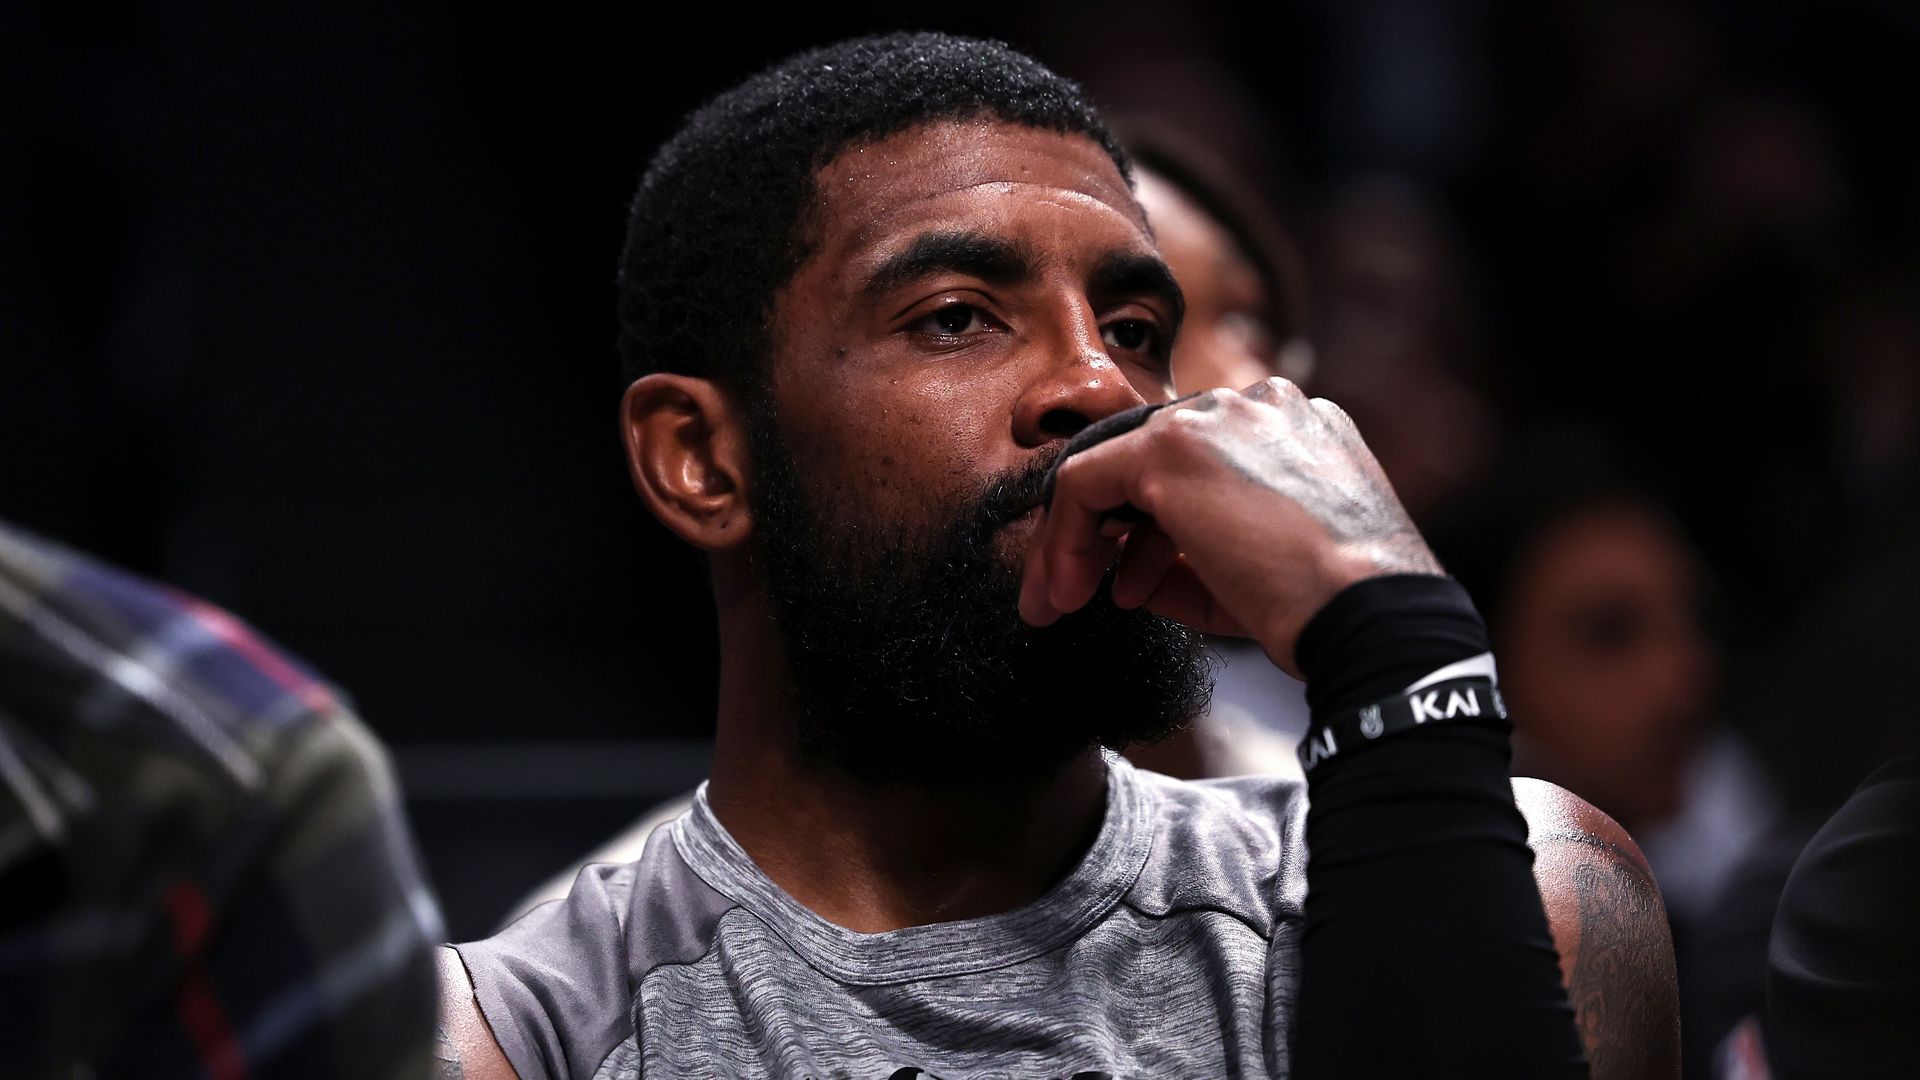 Kyrie Irving #11 of the Brooklyn Nets looks on from the bench.